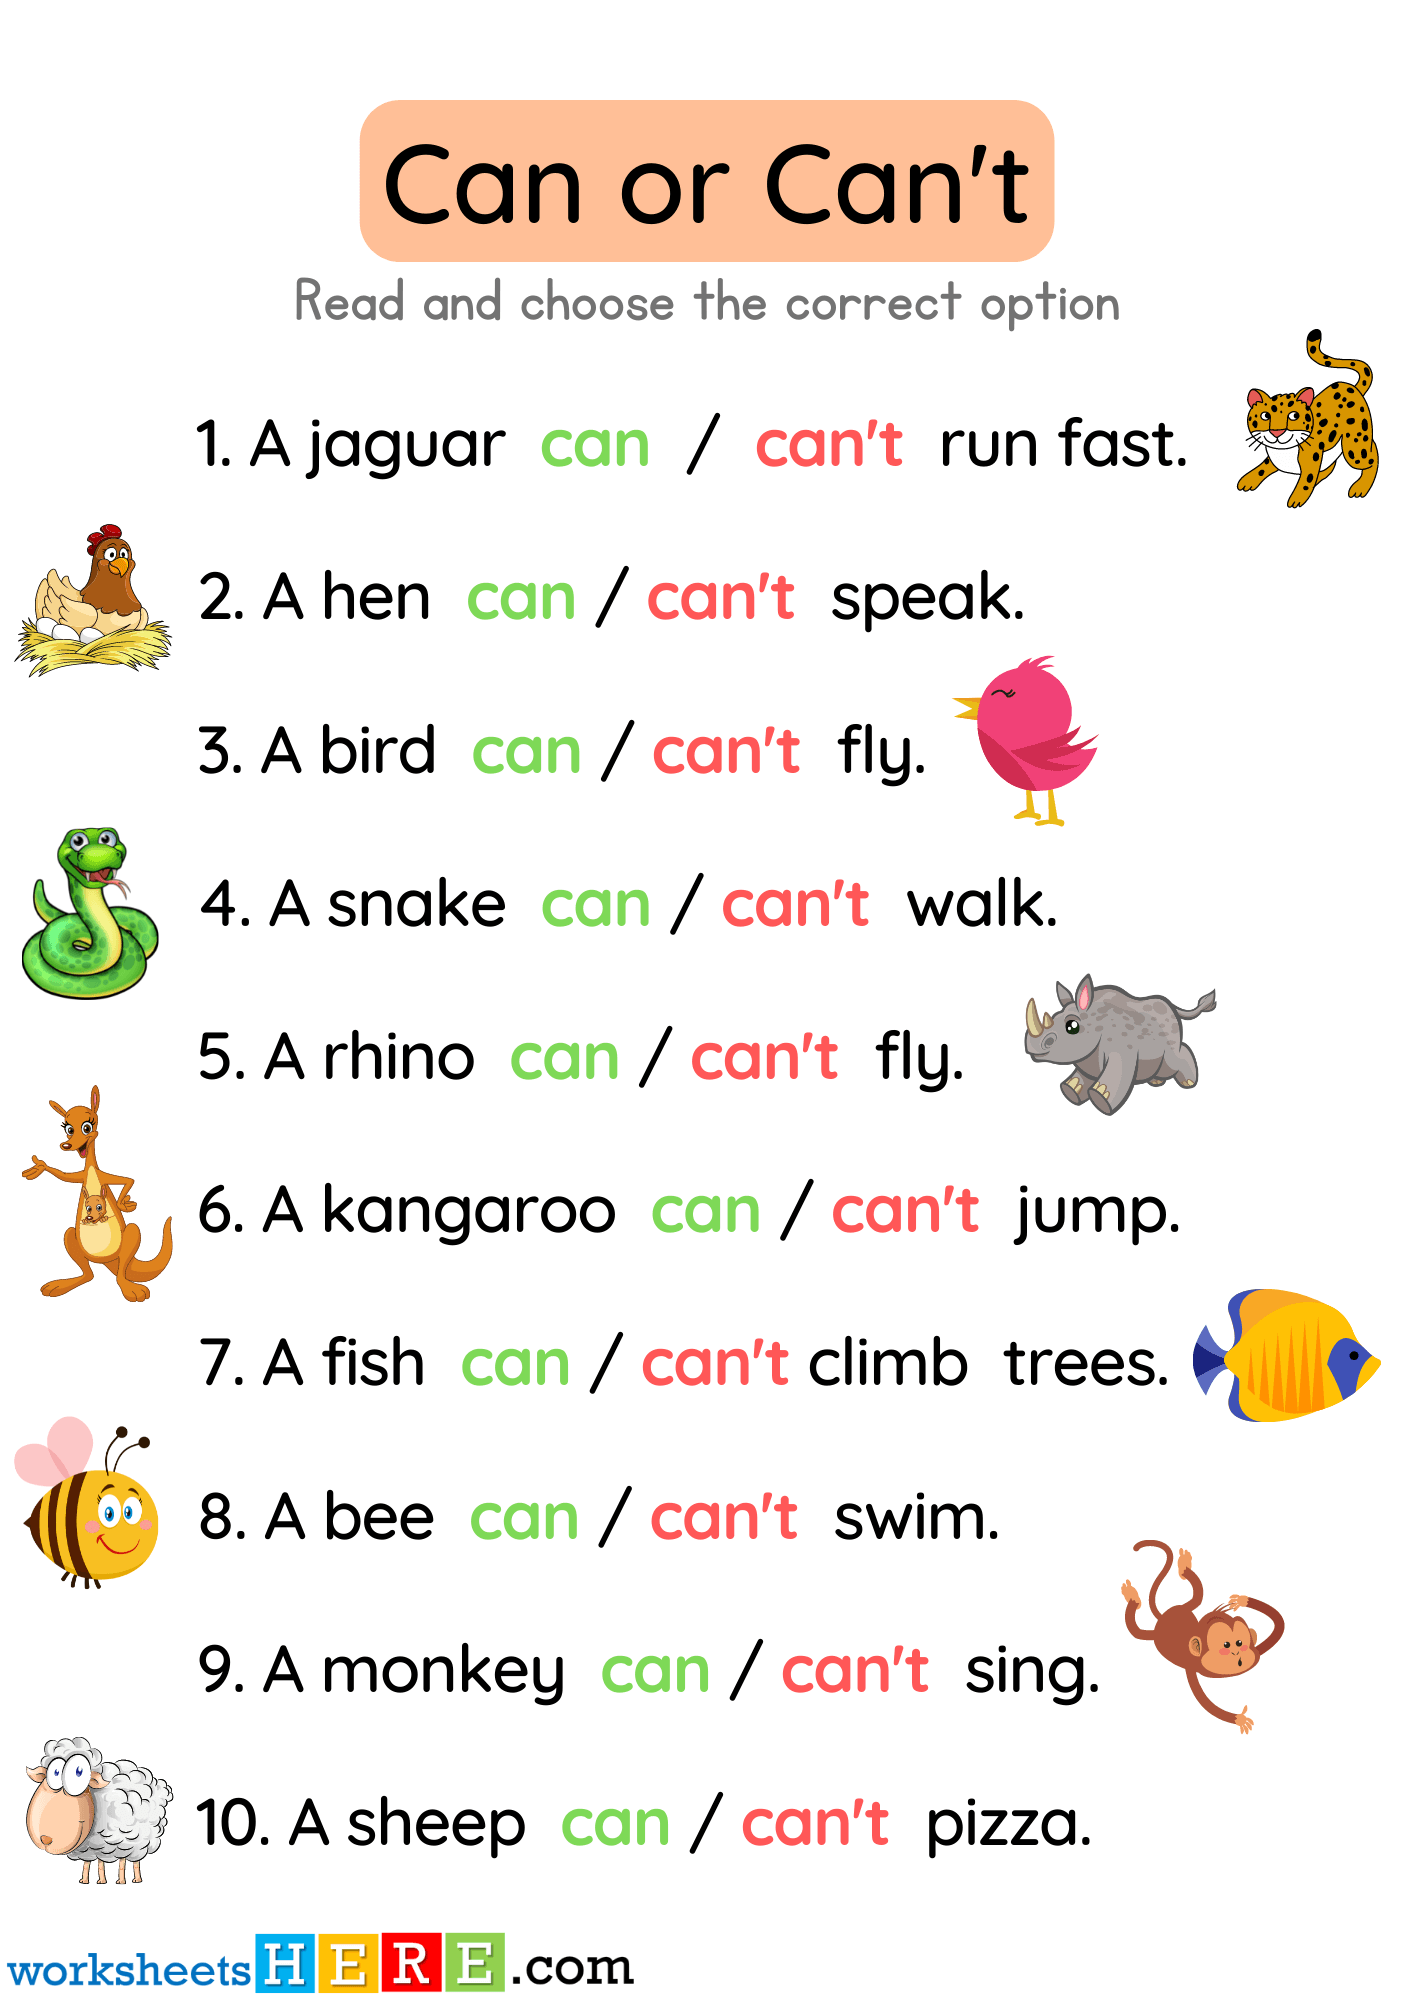 Can or Can’t Exercises with Pictures and Answers Examples PDF Worksheet For Kids